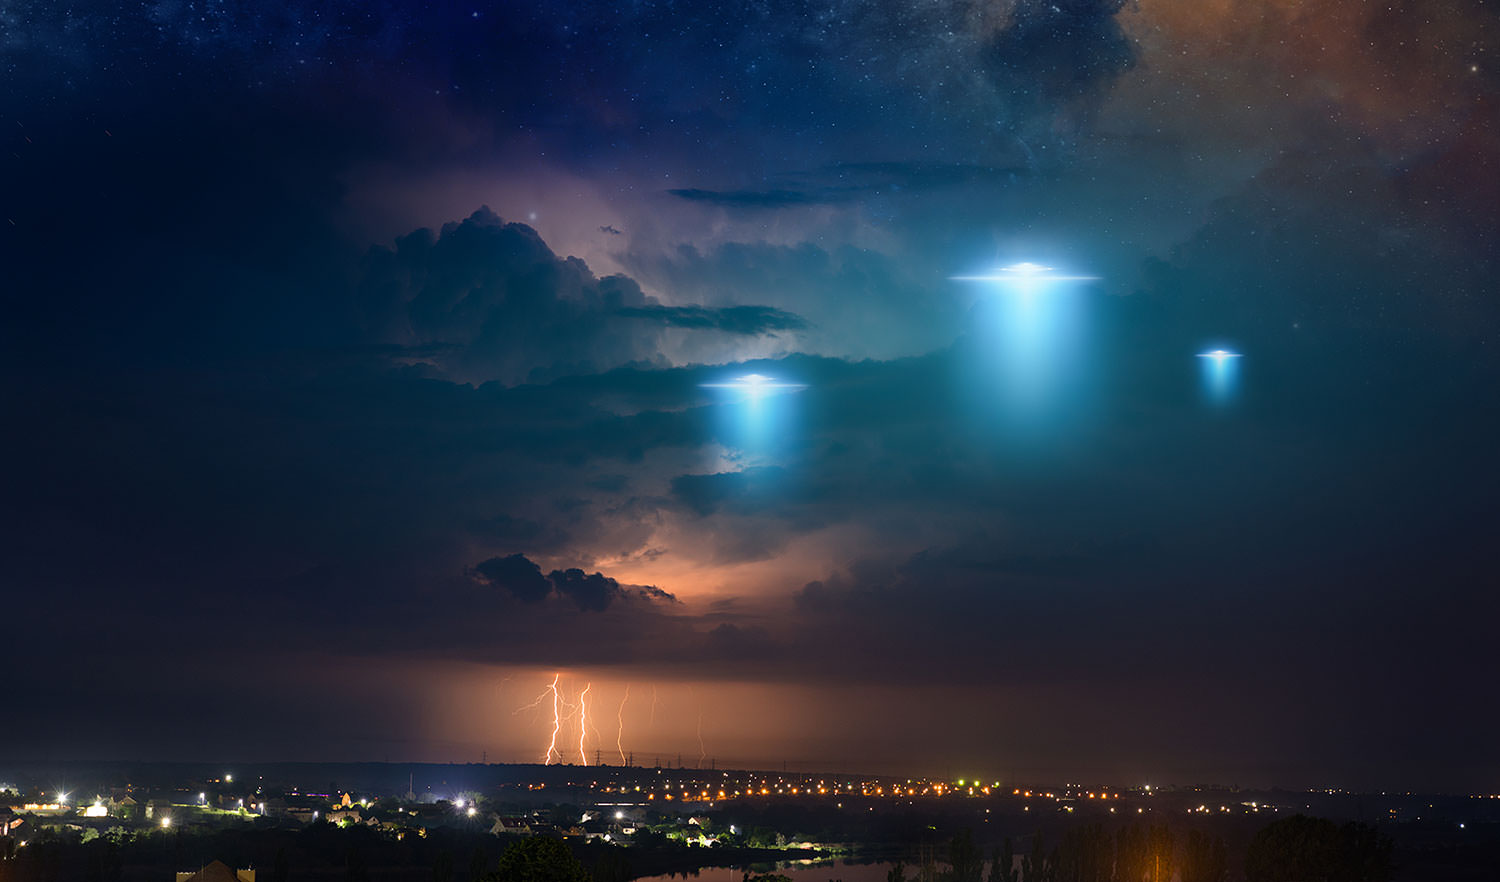 Background Extraterrestrial Aliens Spaceship over city in night sky